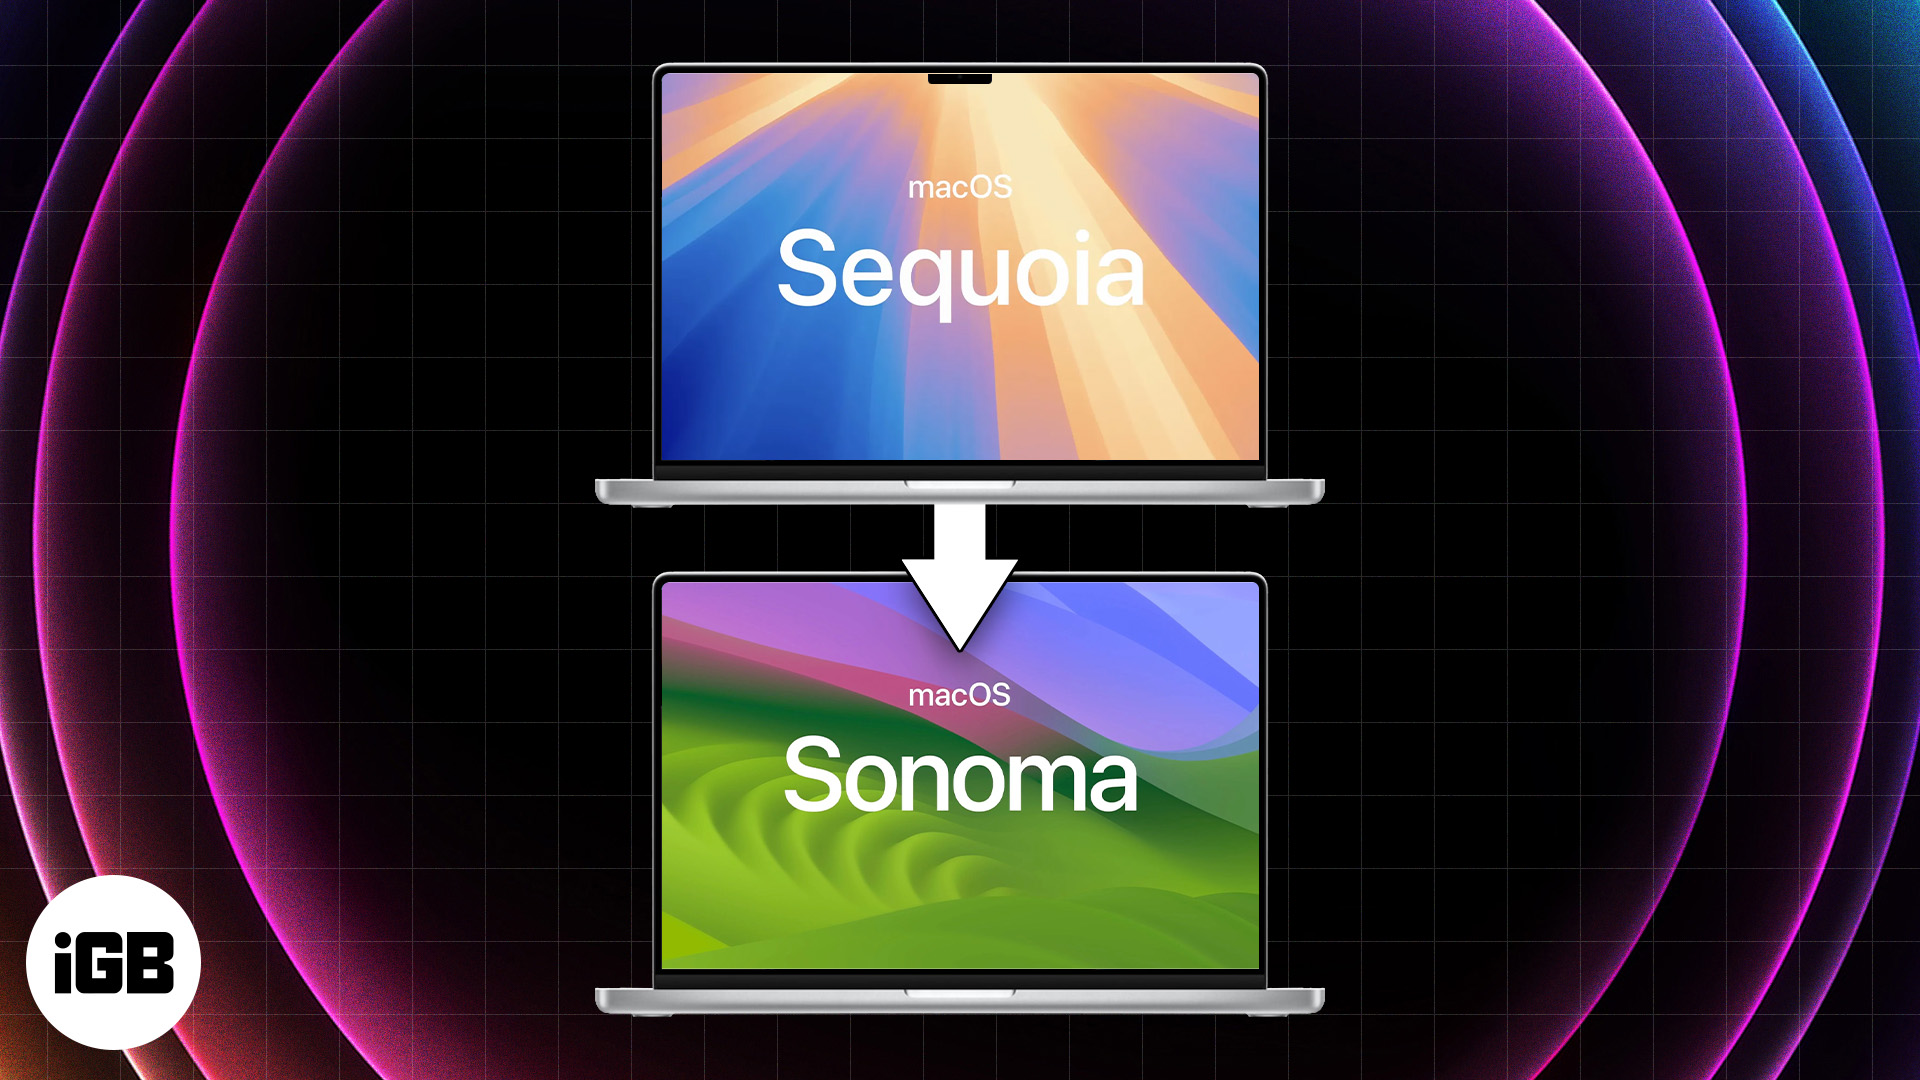 How to downgrade macOS Sequoia to macOS Sonoma without losing data